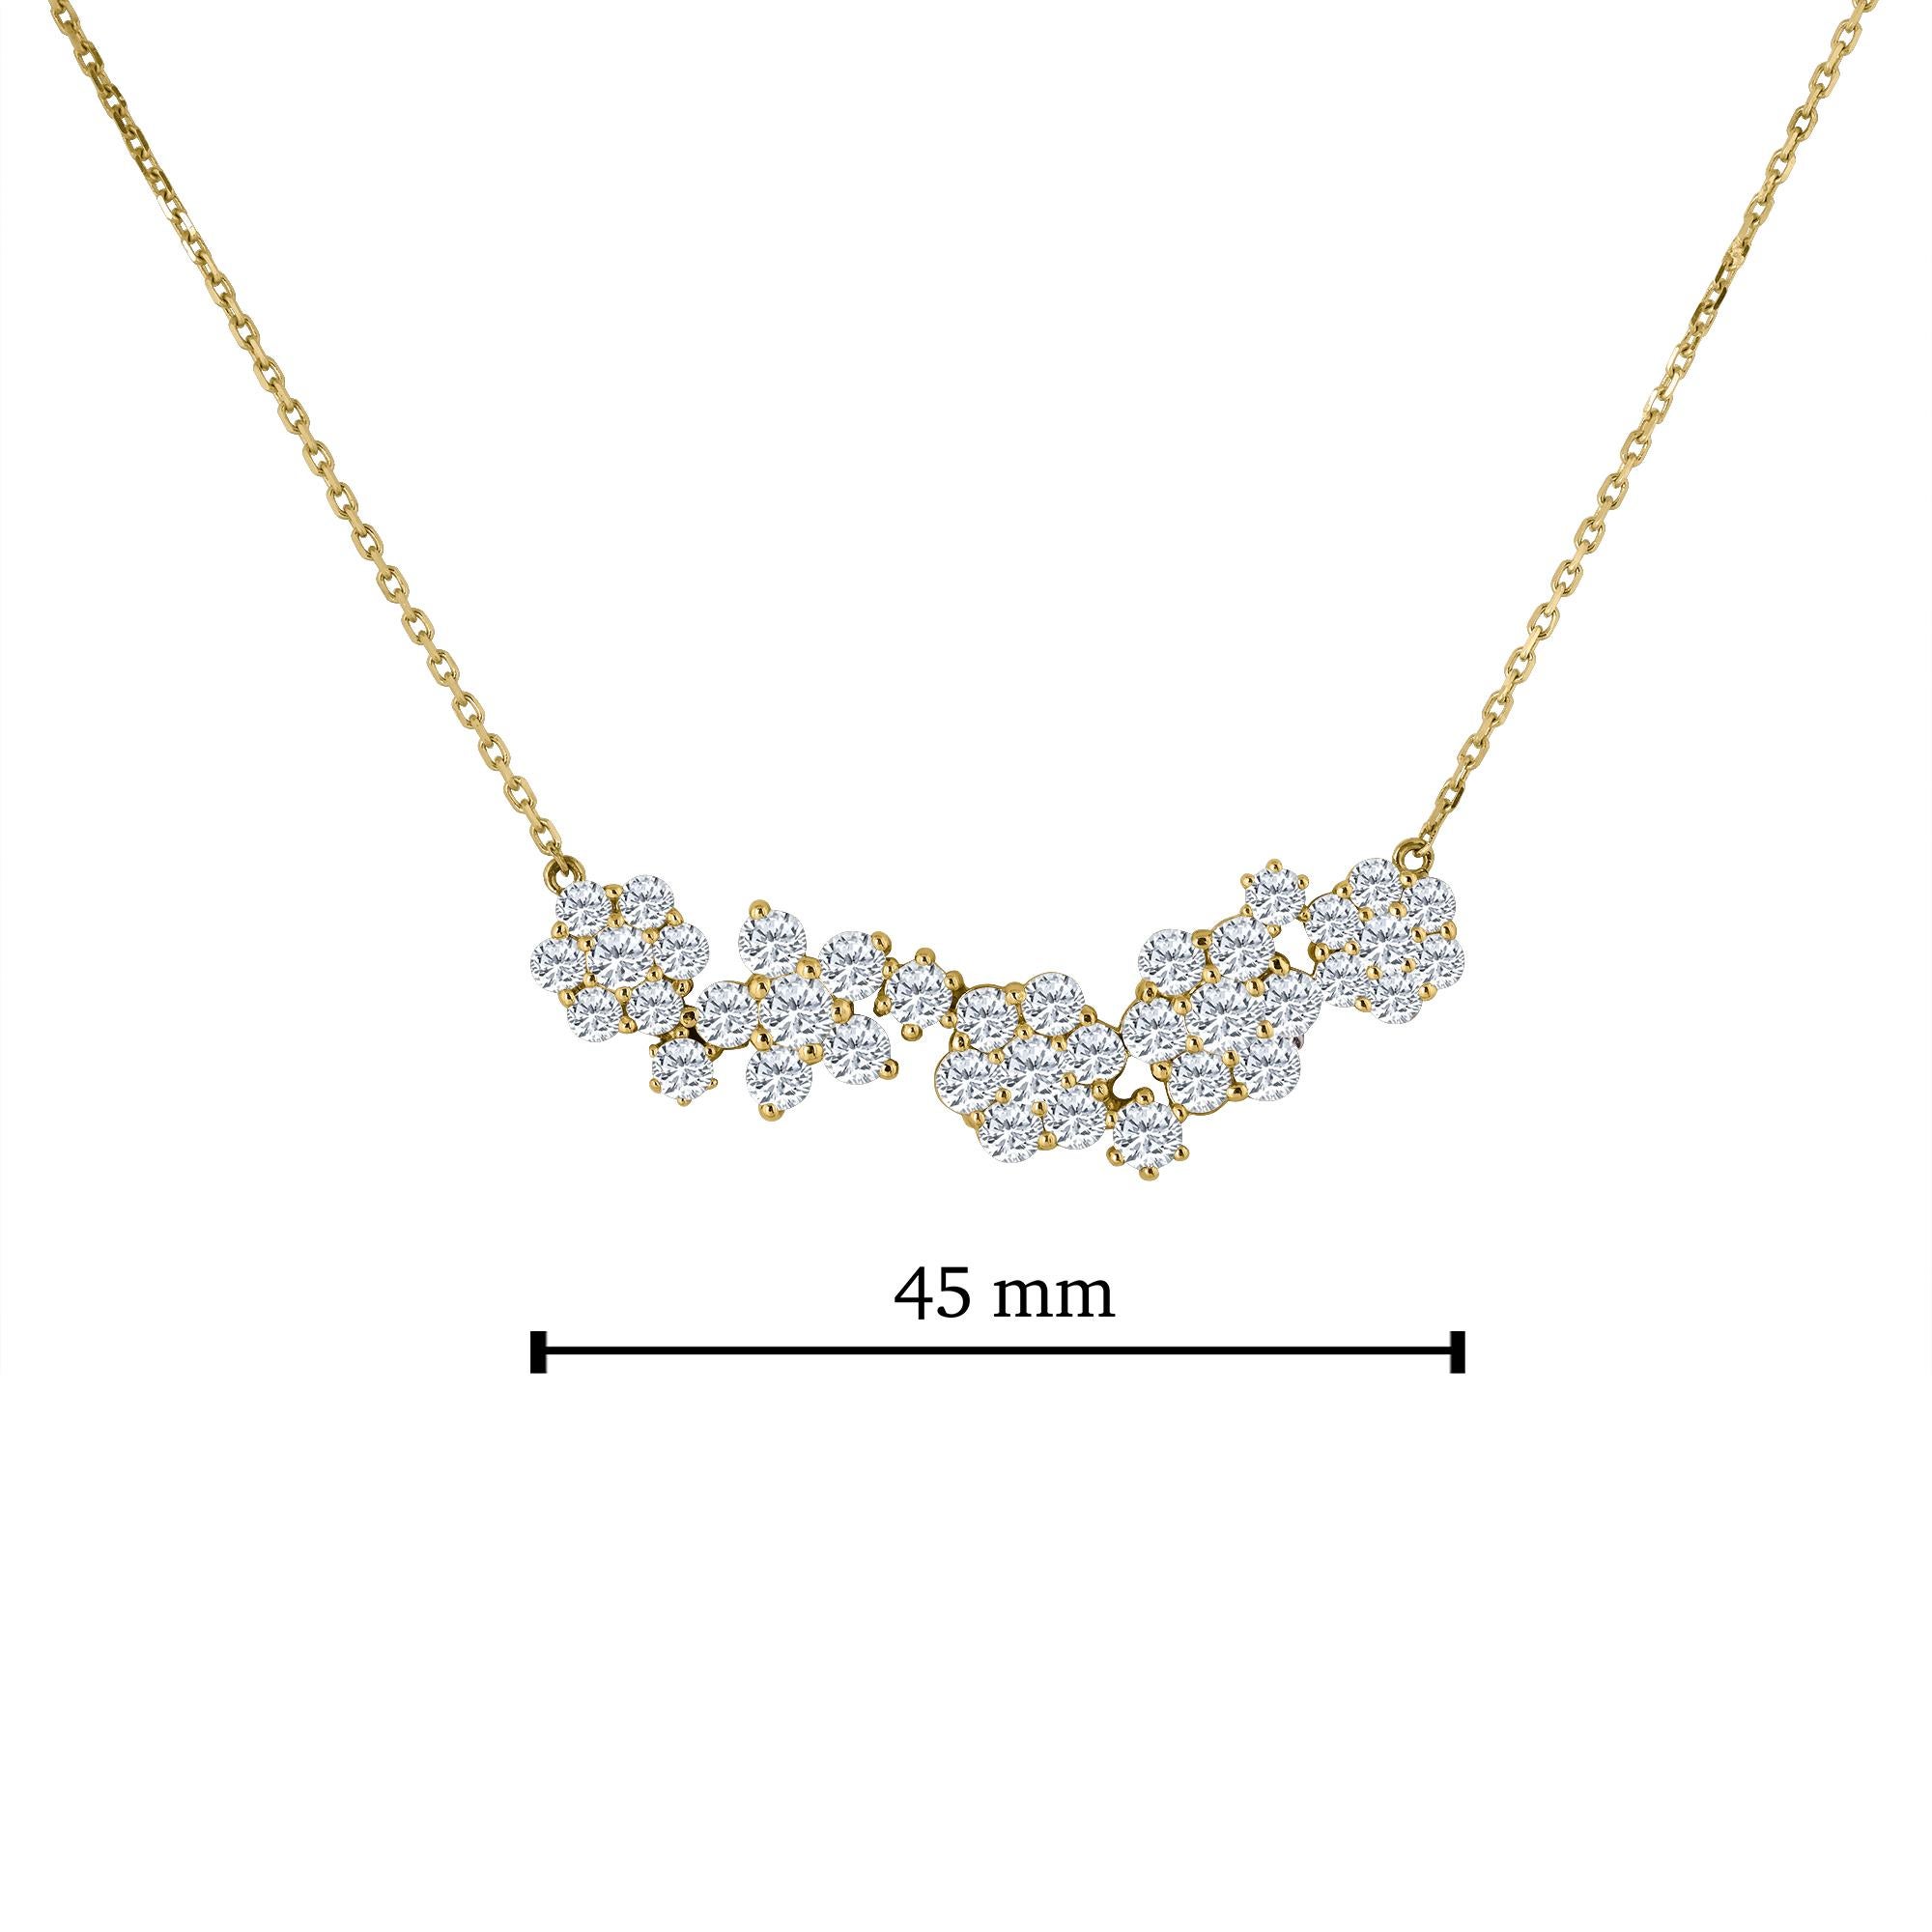 Made in the Emilio Jewelry factory, We design and manufacture hundreds of pieces every year from design to completion. 
Approximate diamond weight: 4.08
Color: F
Clarity: Si 
Length: 18 Inch adjustable to 16